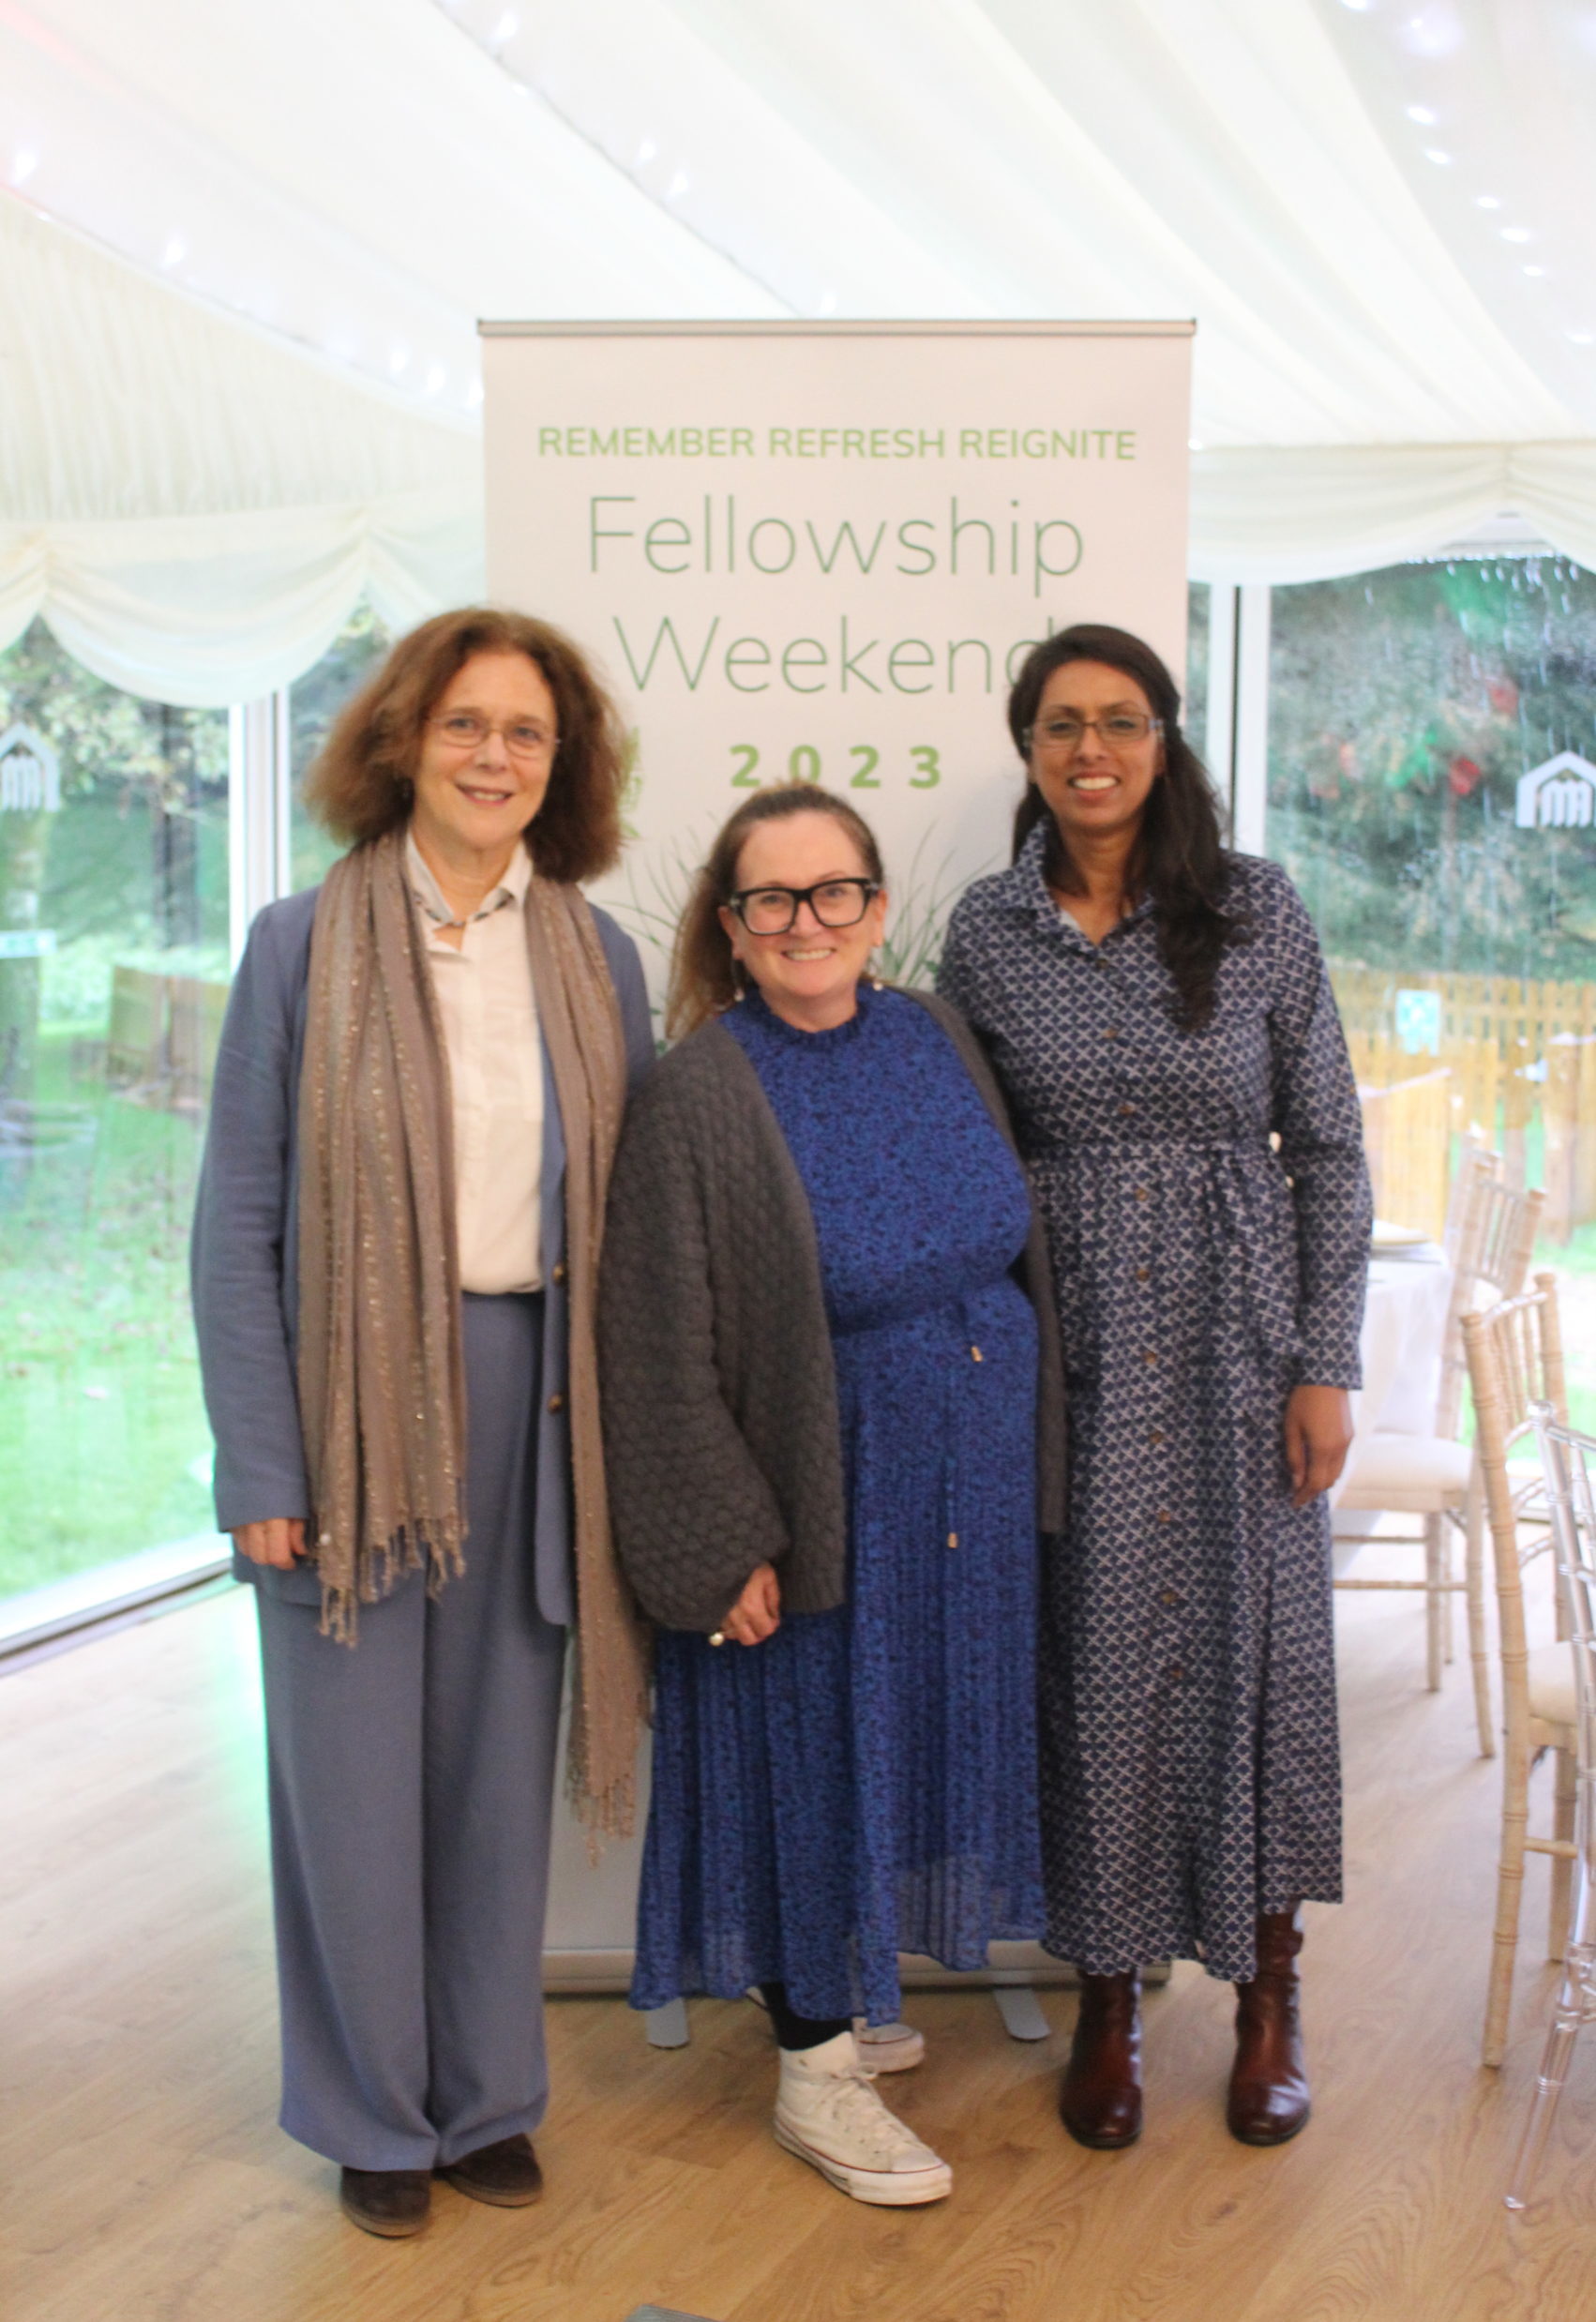 Margaret Cosens, Chair of Trustees for IofC UK (left), Trudy Lister, Head of Communications for IofC UK (middle) and Elizabeth Laskar, Fellowship Weekend Coordinator, IofC UK. 